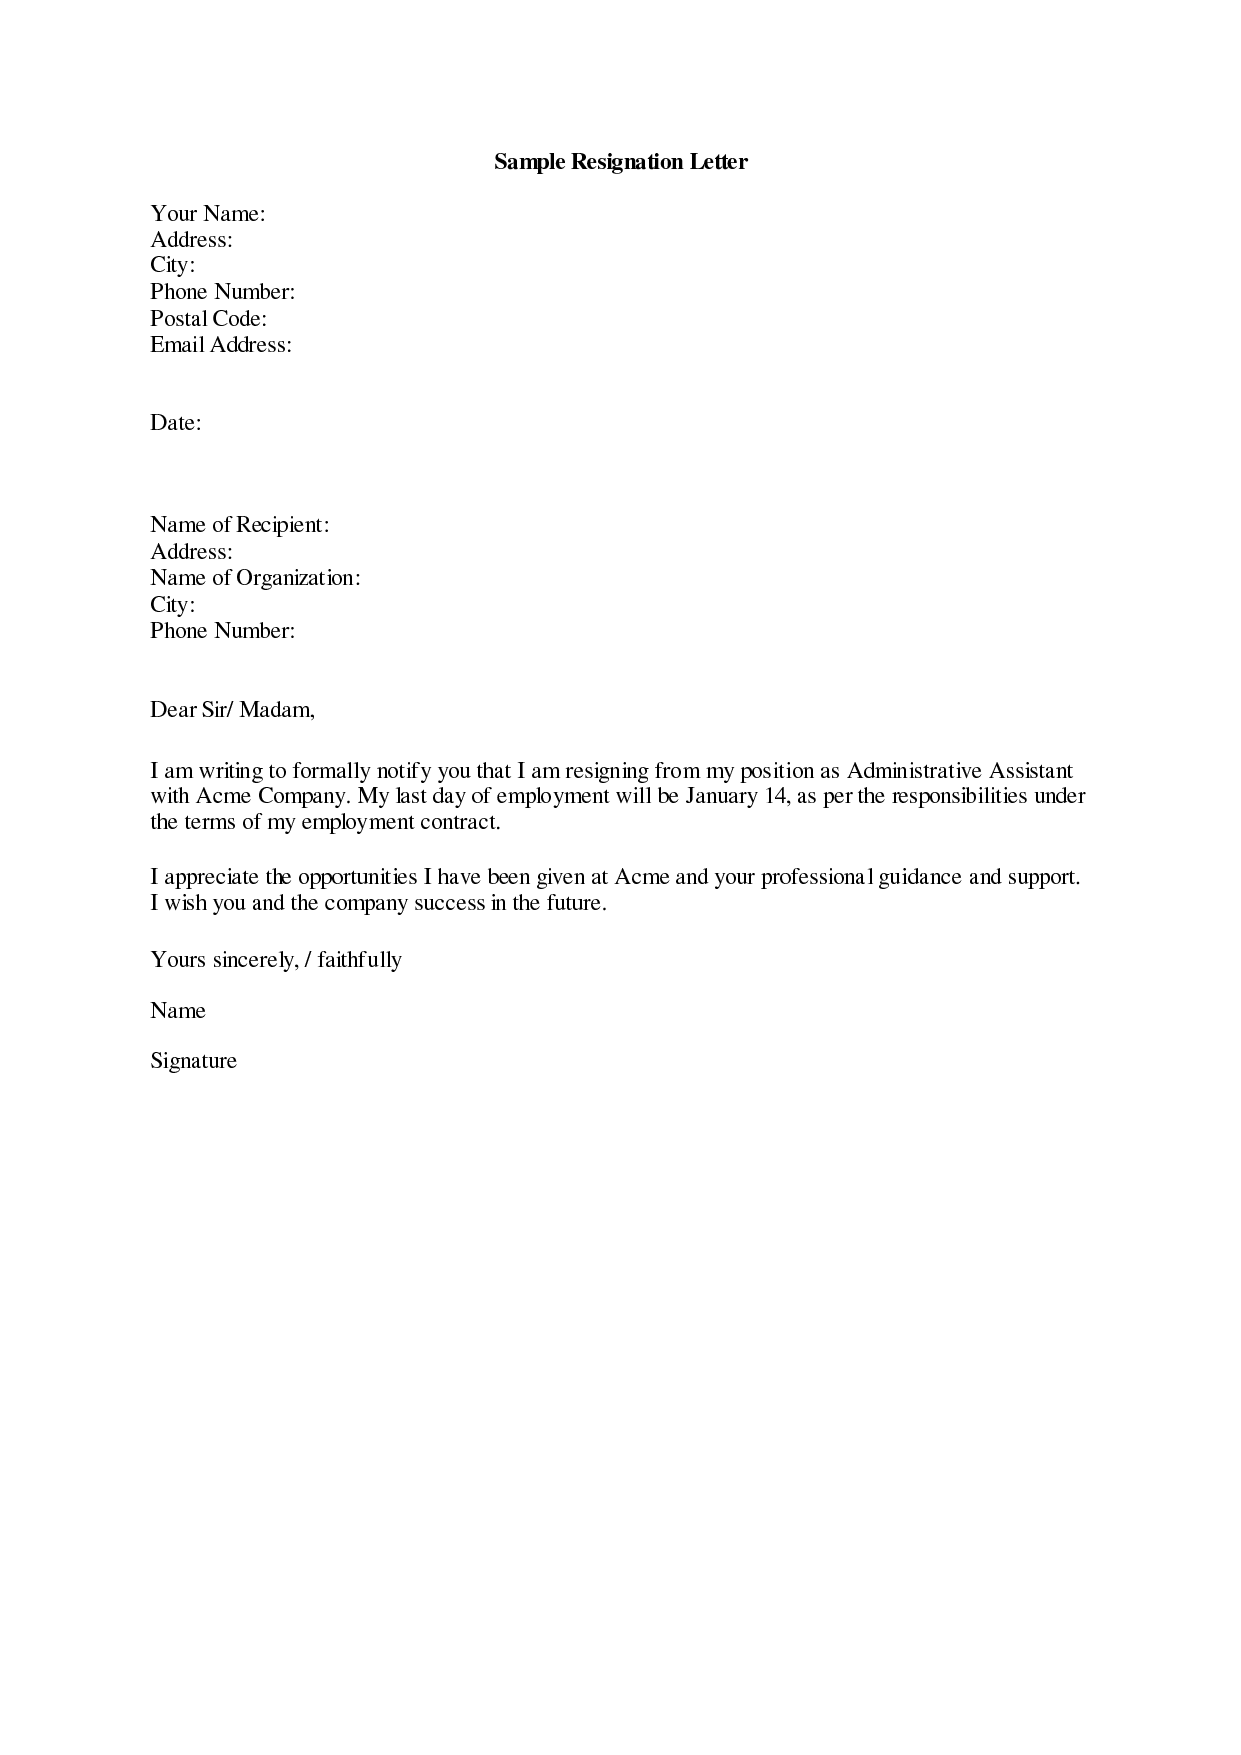 Letter Examples Of Resignation